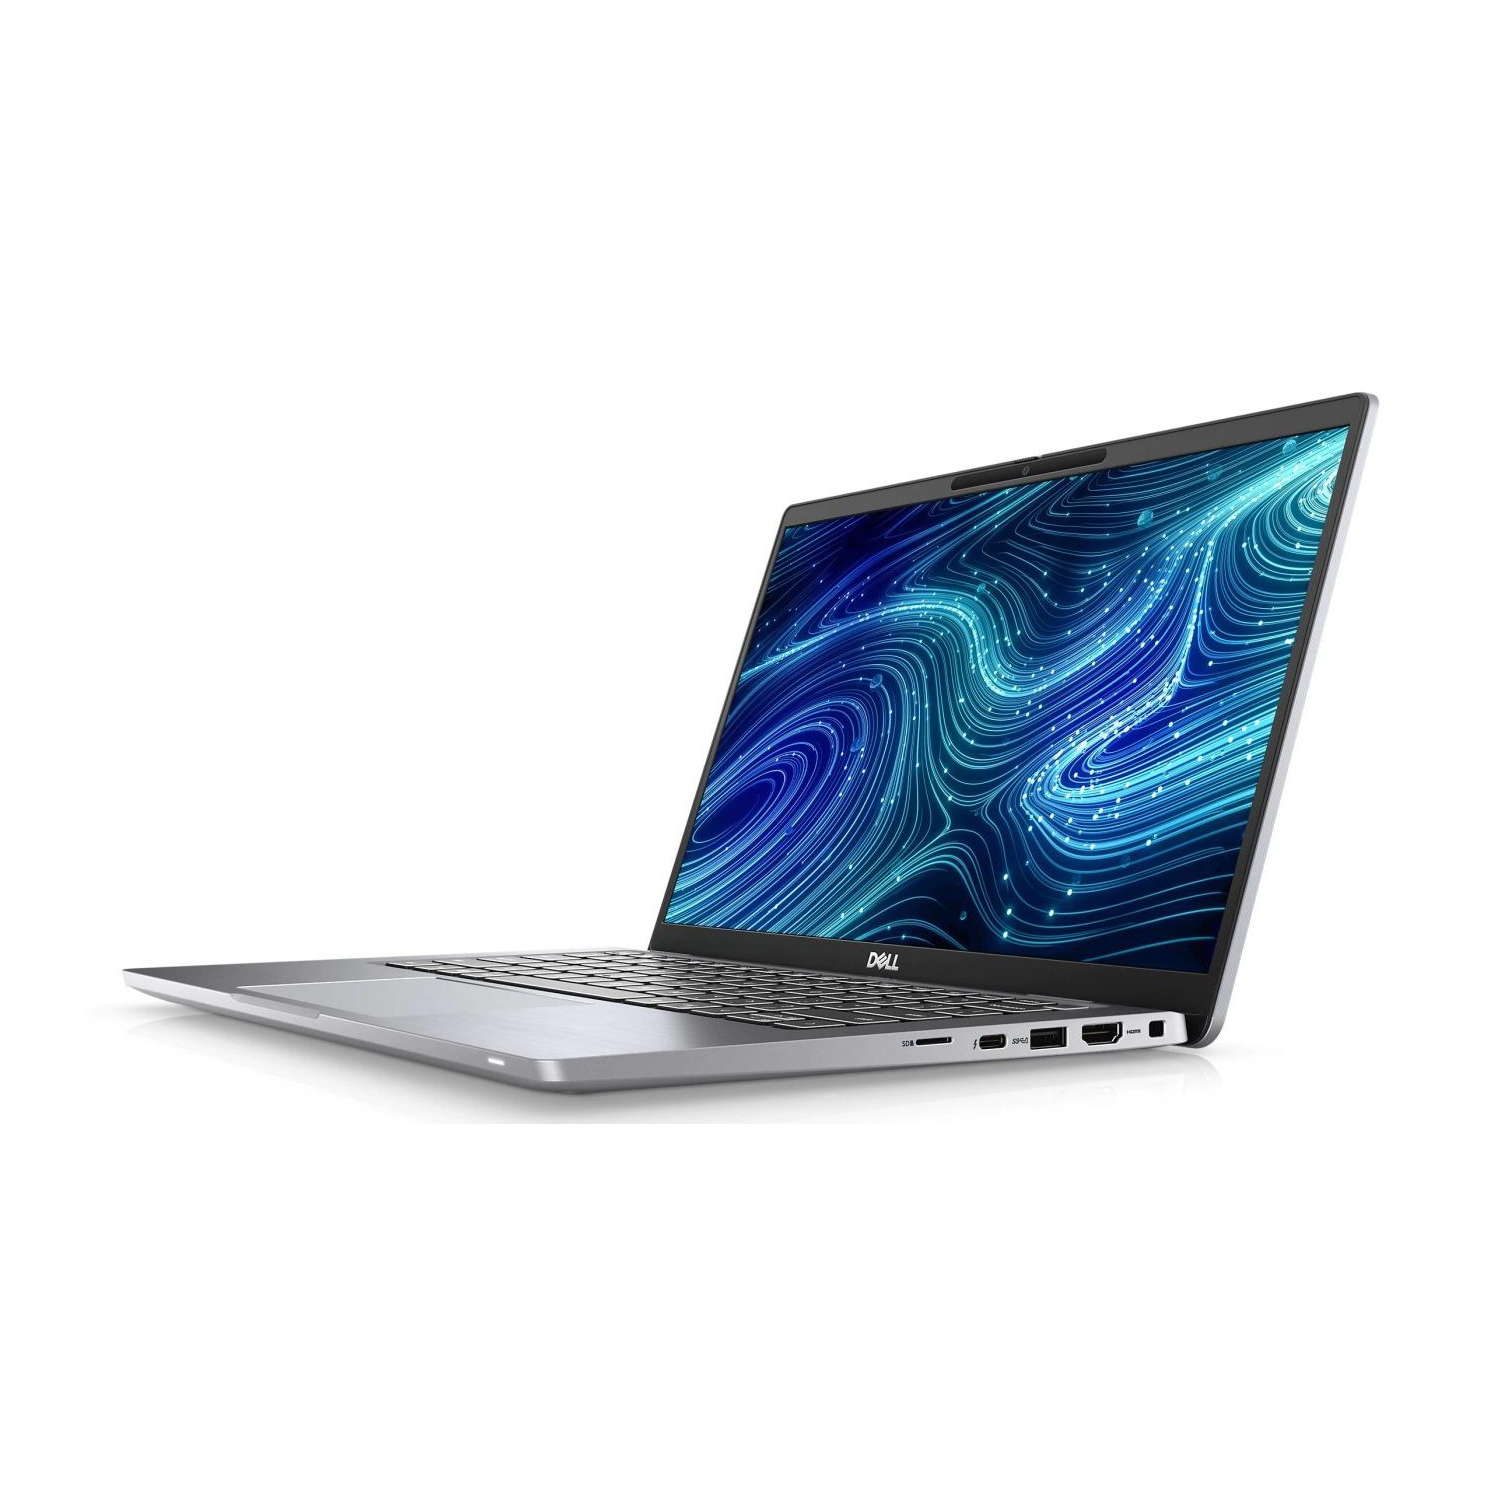 Refurbished (Excellent) - Dell Latitude 7000 7420 Laptop (2021) | 14" FHD | Core i7 - 1TB SSD - 16GB RAM | 4 Cores @ 4.7 GHz - 11th Gen CPU Certified Refurbished